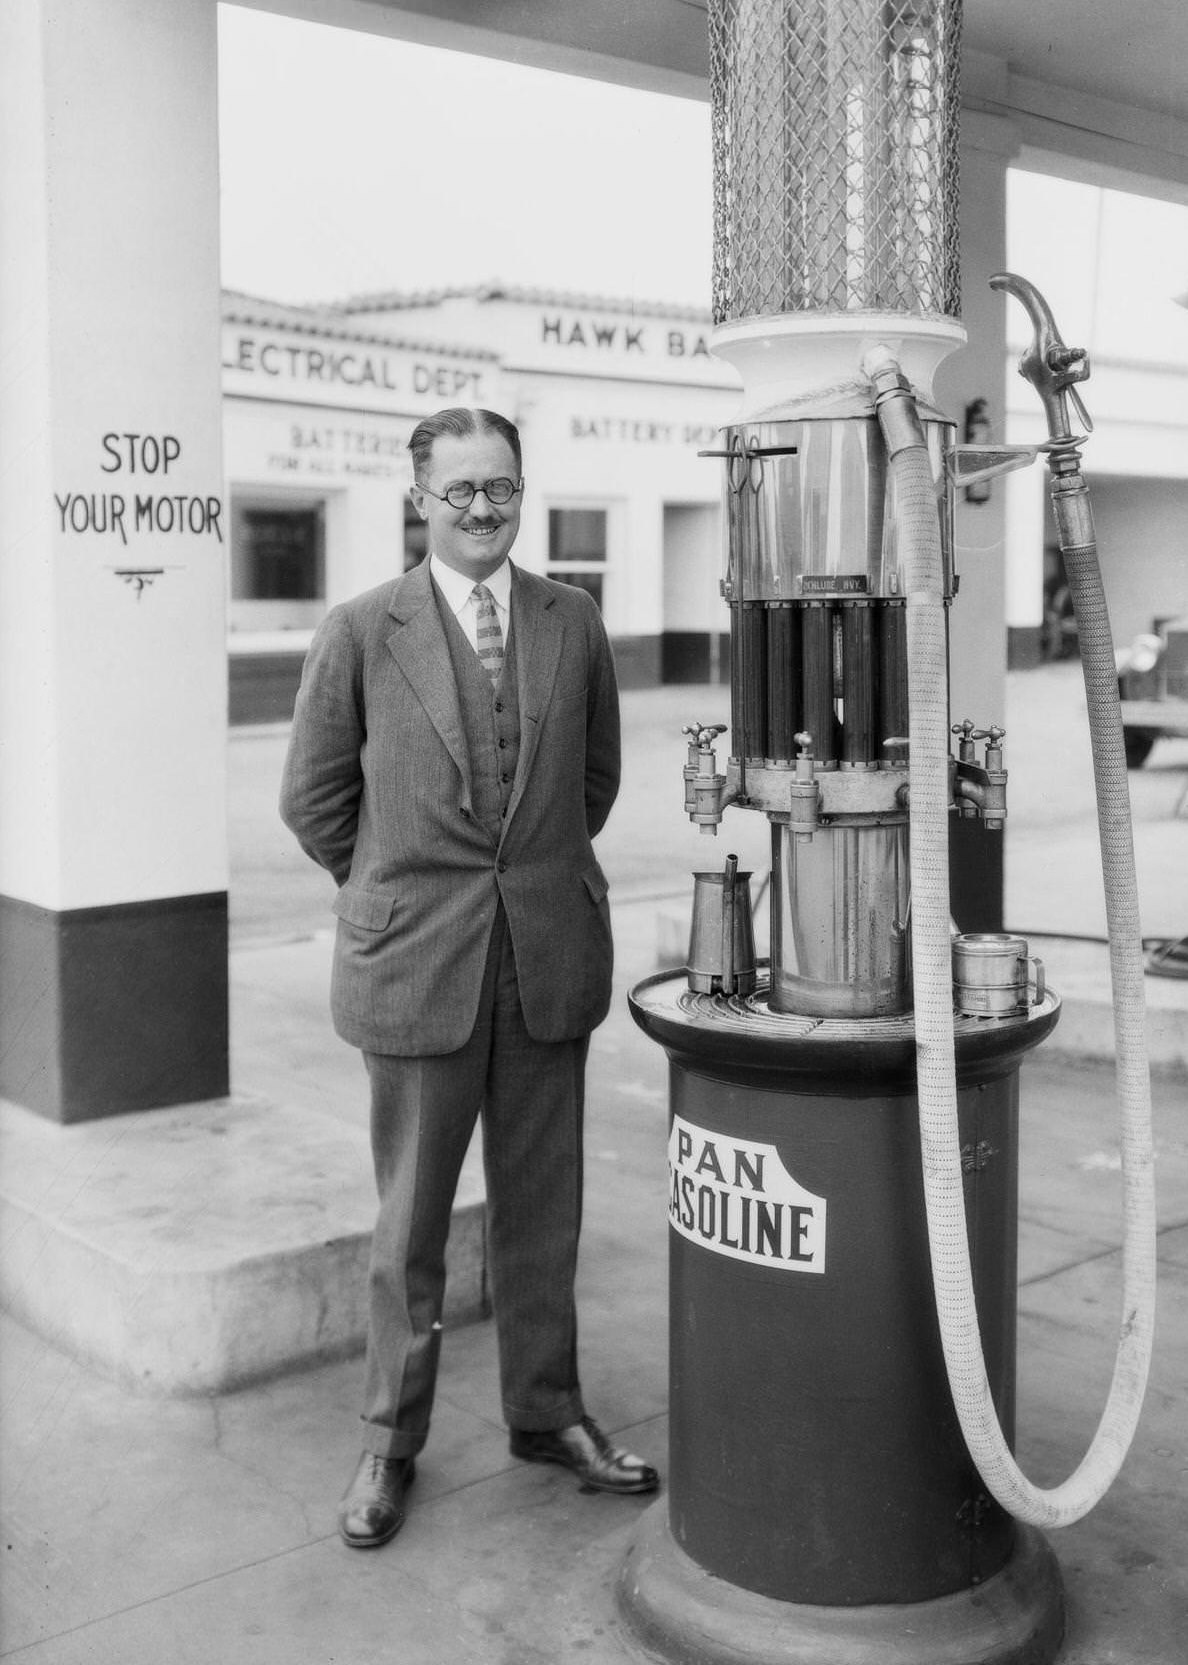 Mr. Crary at Pan American service station on North Vermont Avenue, Los Angeles, 1925.